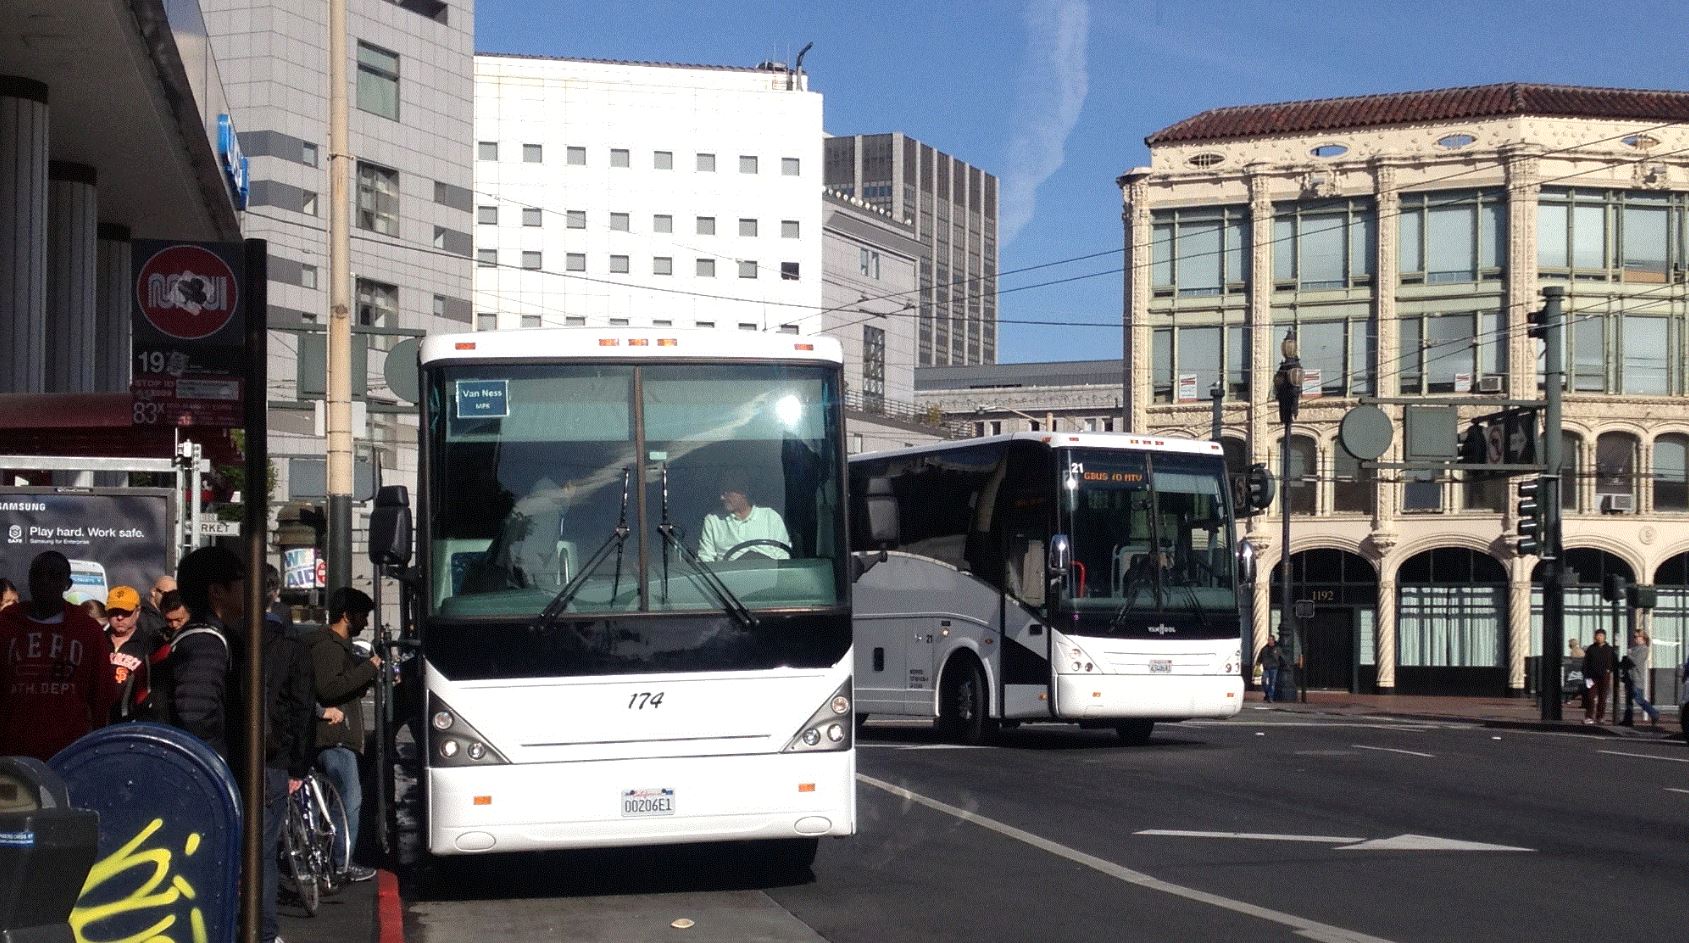 Two white buses board riders along a busy sidewalk.